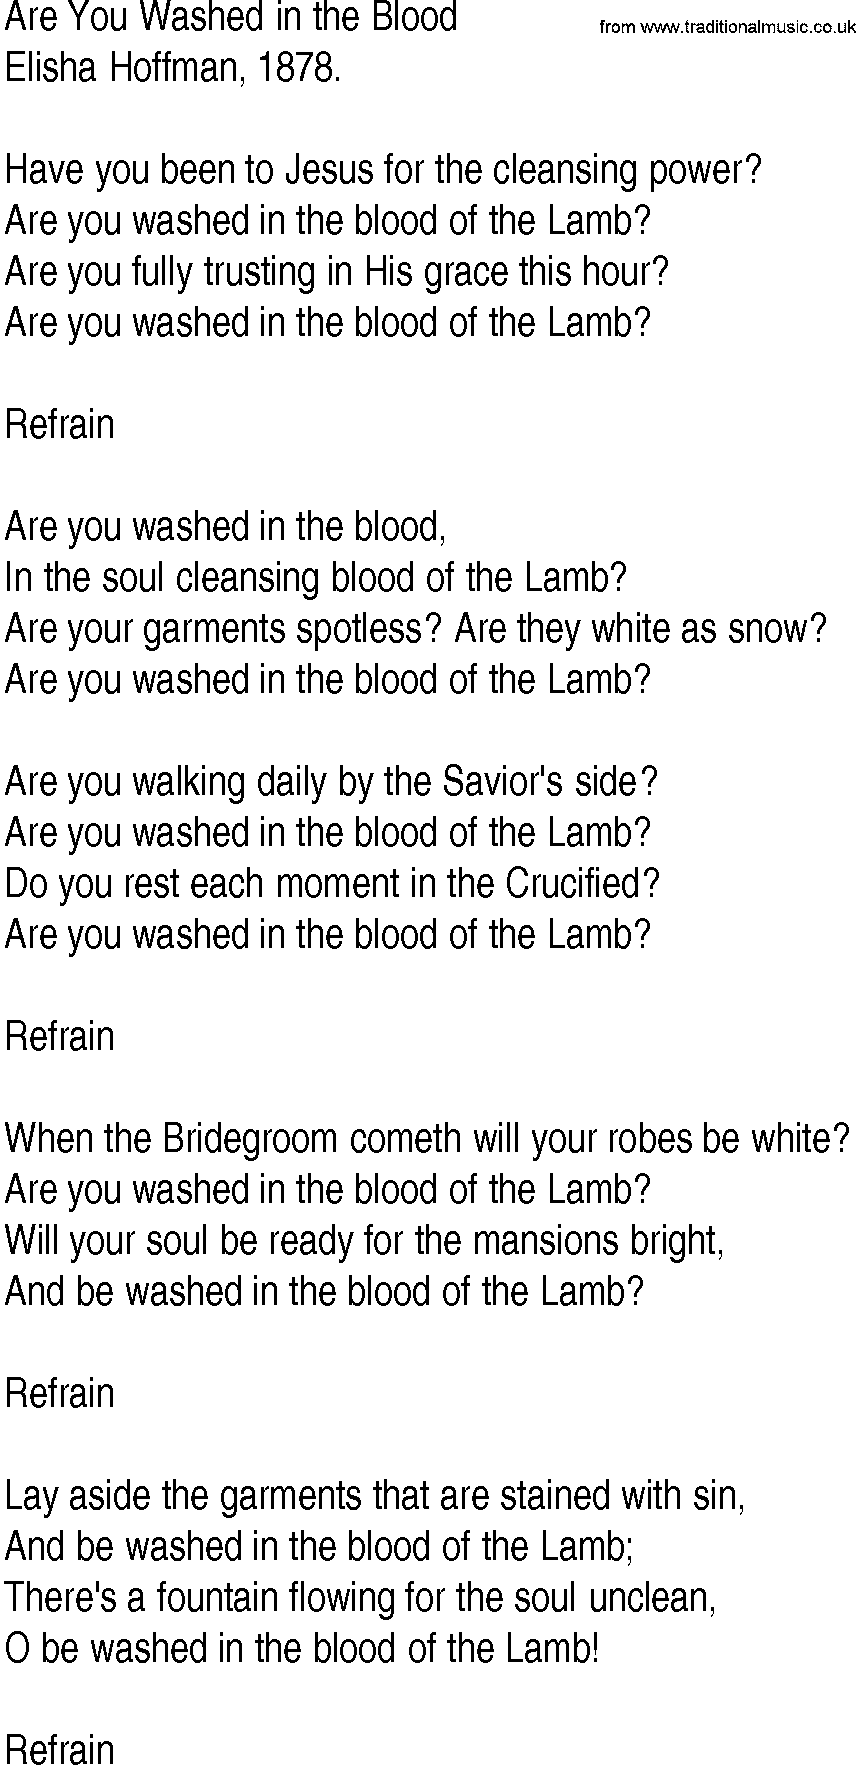 Hymn and Gospel Song: Are You Washed in the Blood by Elisha Hoffman lyrics